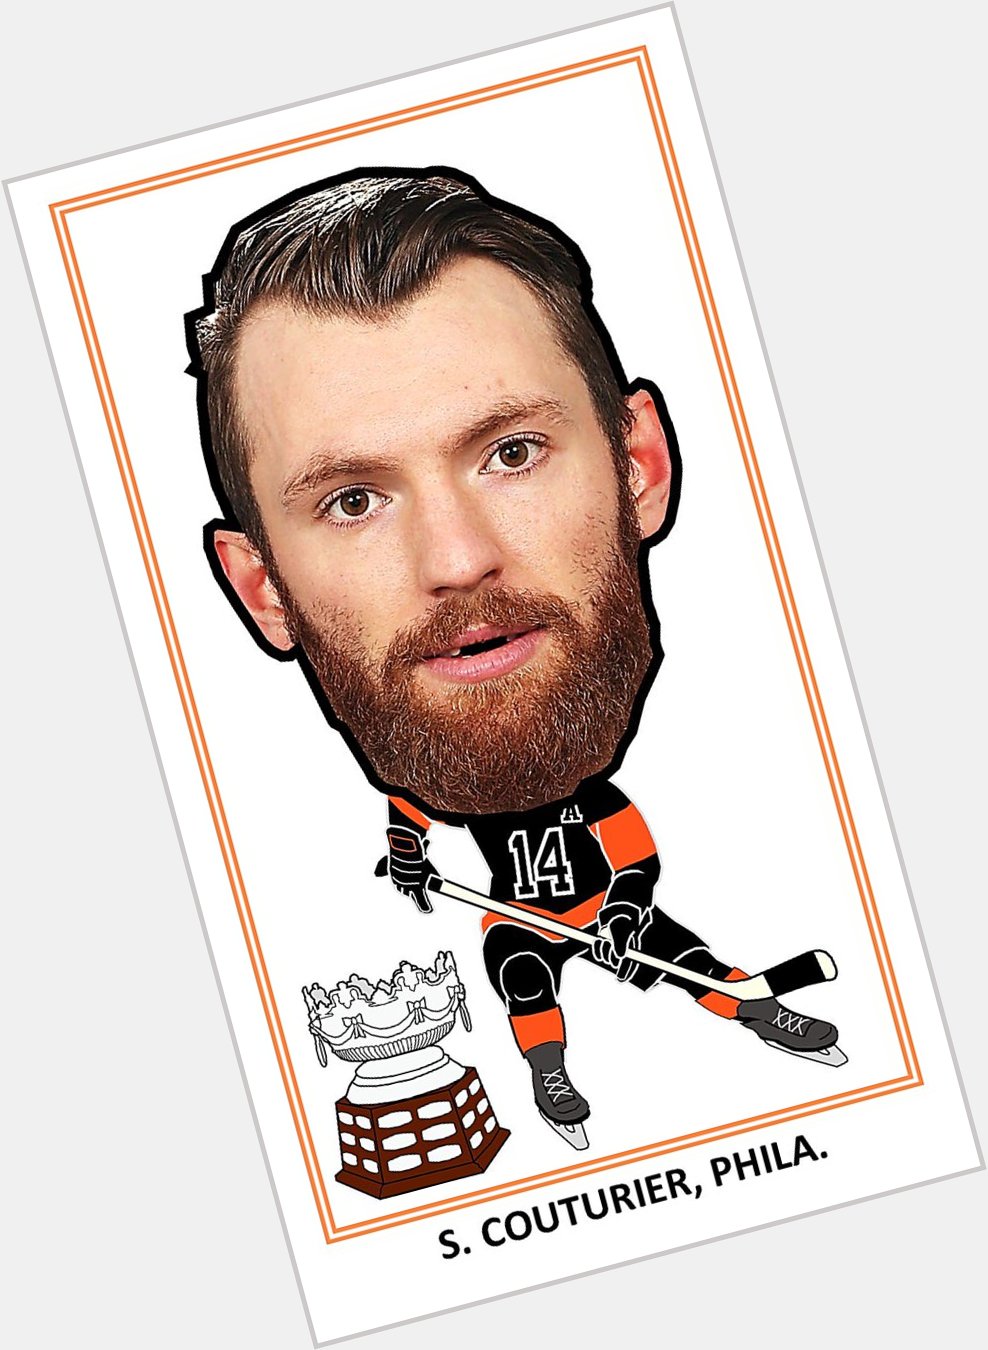 Happy 29th birthday to Sean Couturier! 